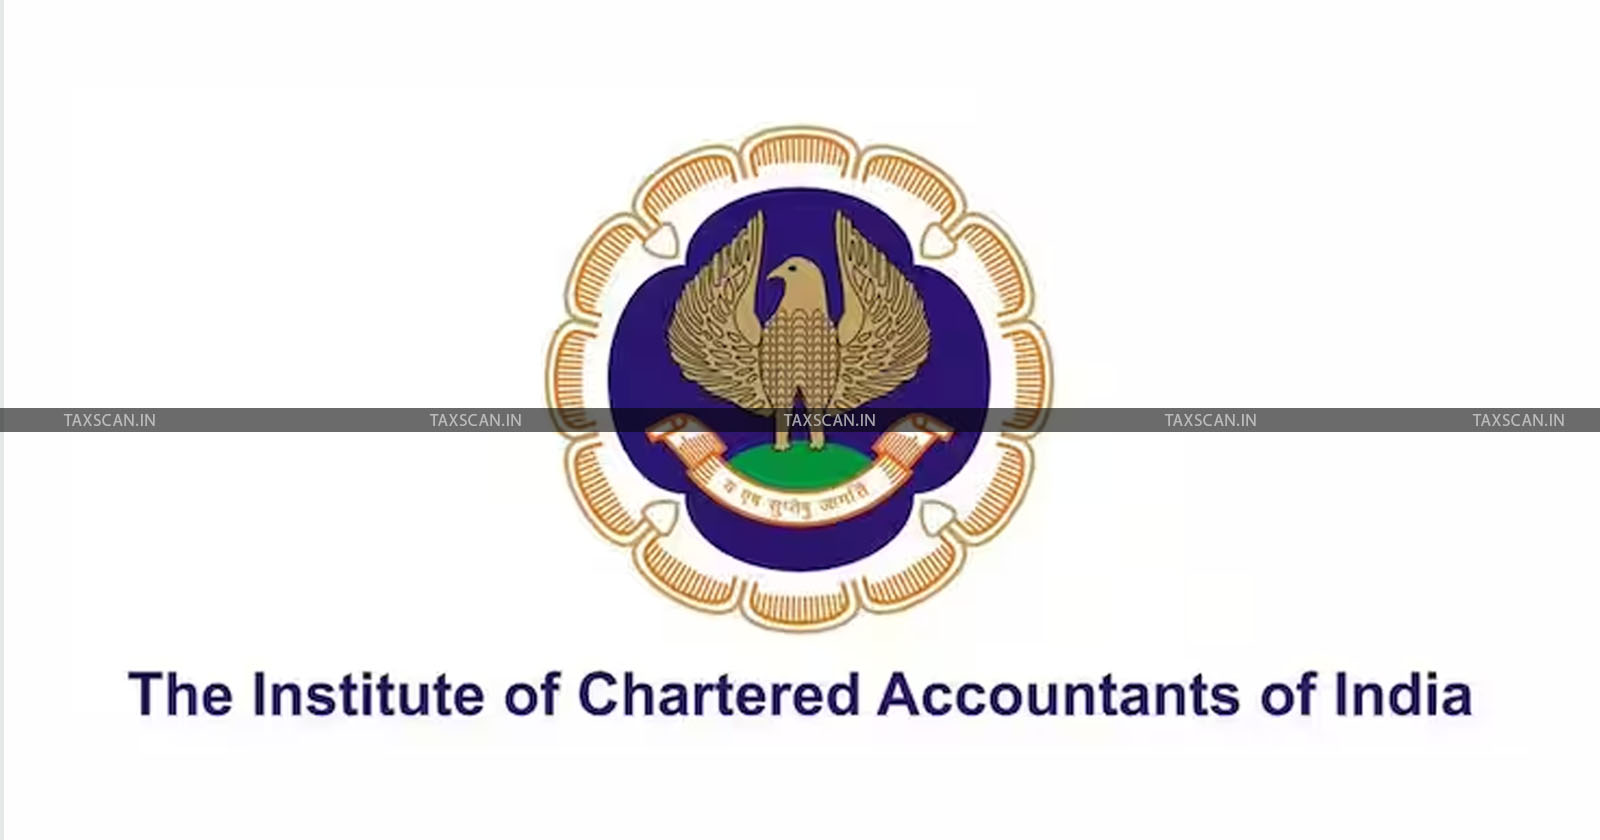 ICAI - Results - Post Qualification Course Exams - ICAI Declares Results of Post Qualification Course Exams - taxscan